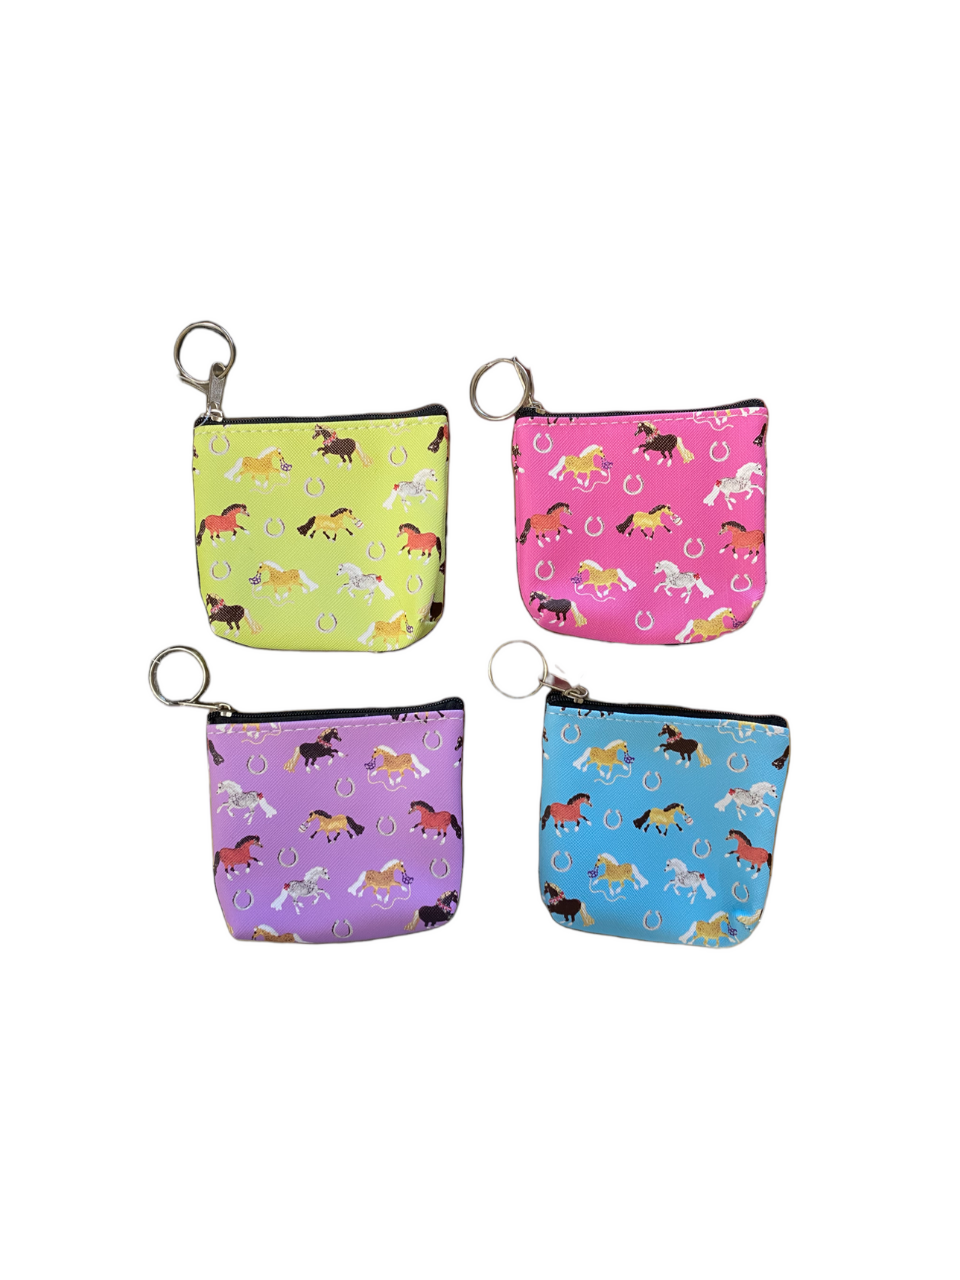 AWST International pony coin pouch